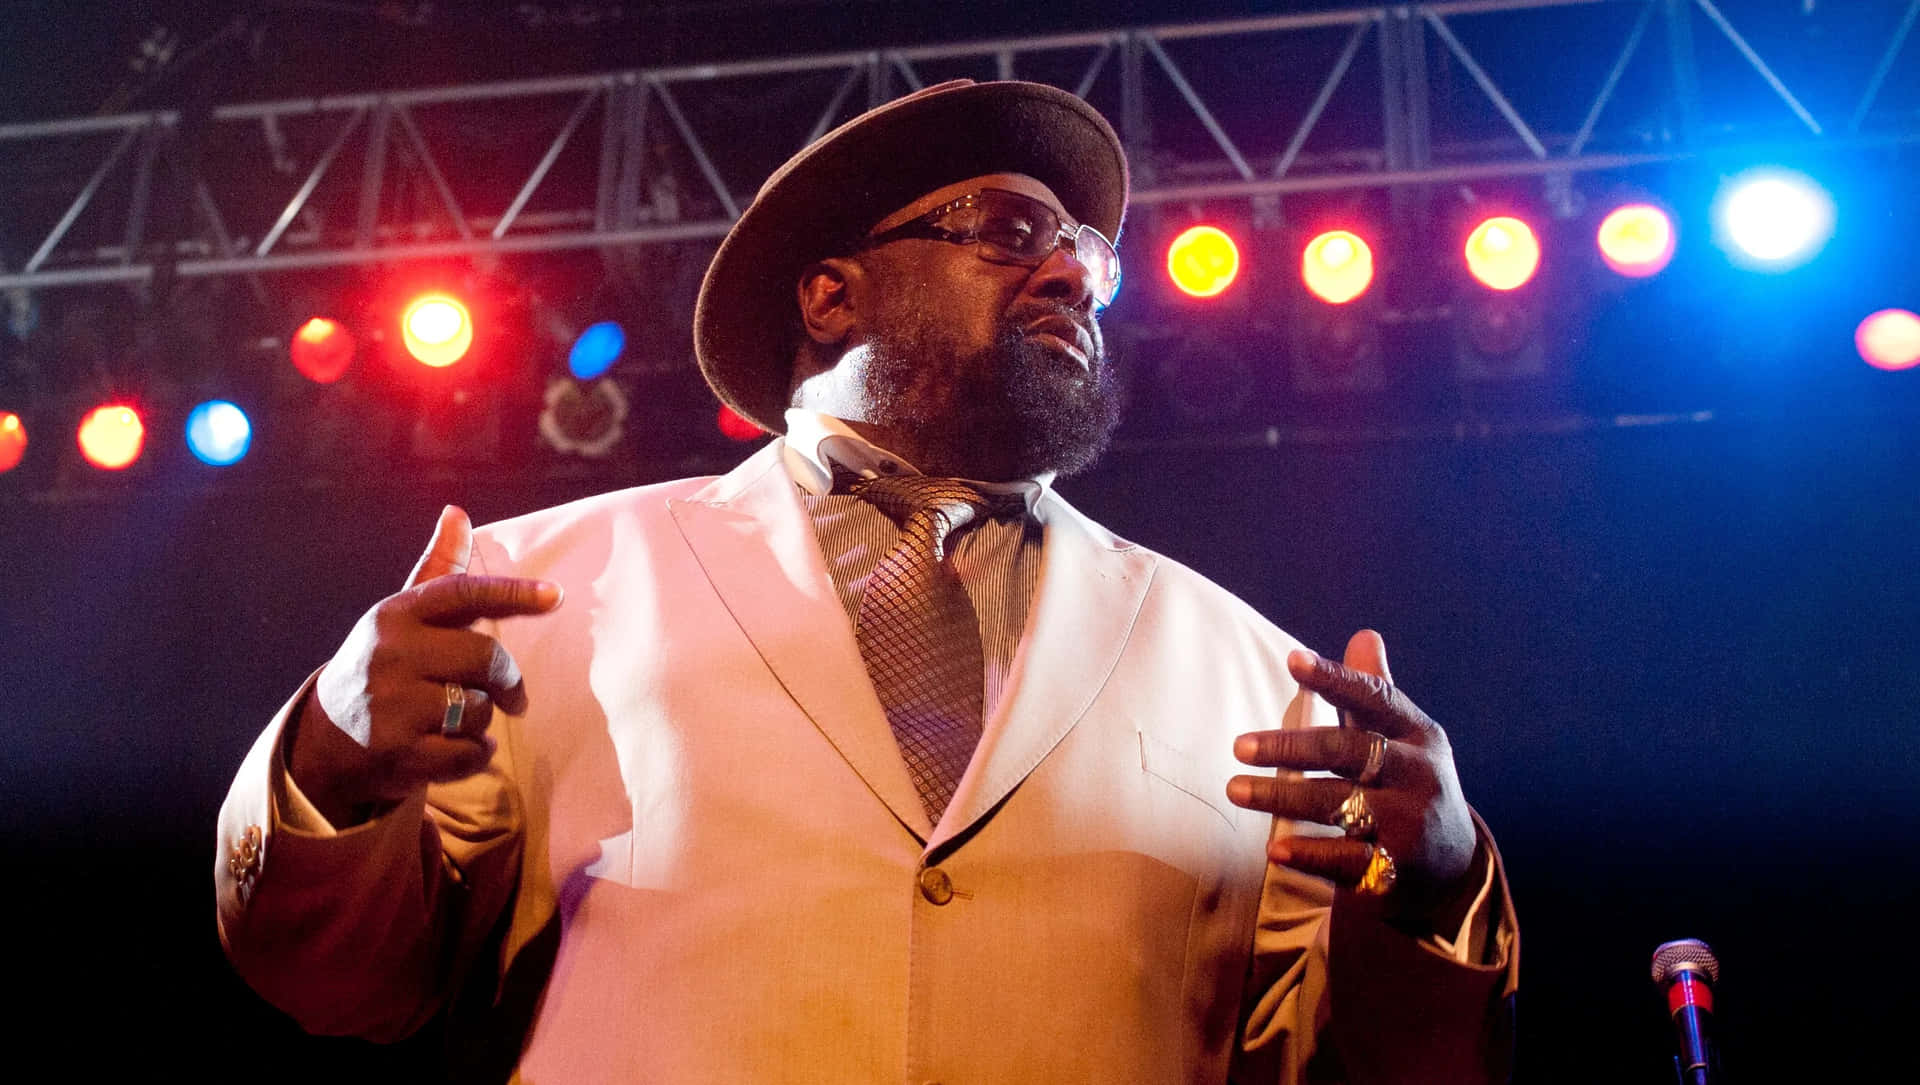 Music Legend George Clinton in Action Wallpaper